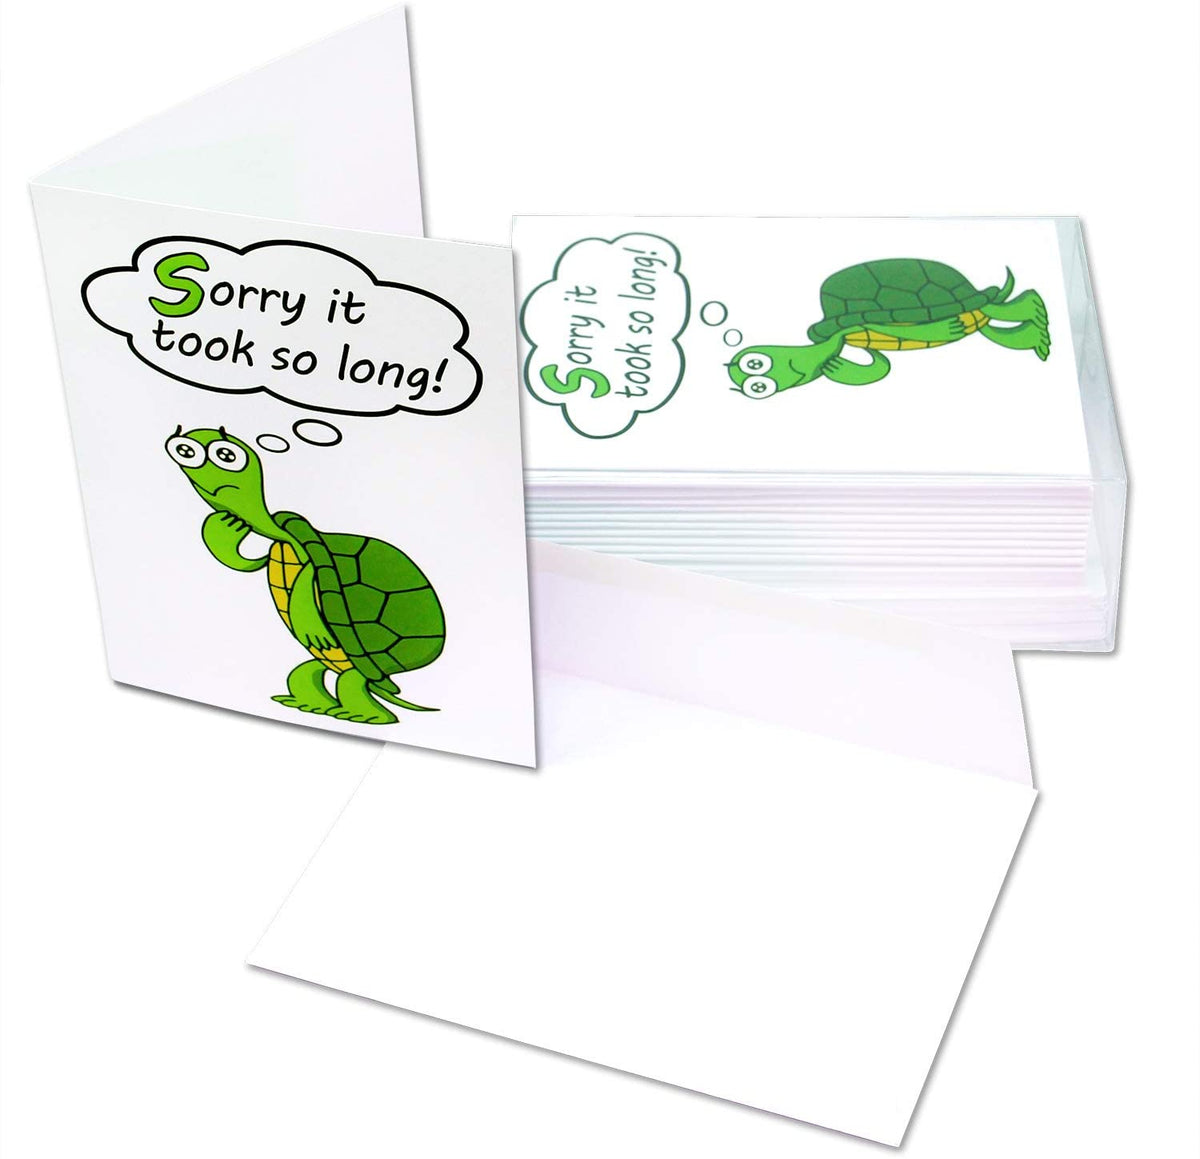  Small World Greetings Oops! Apology Sorry Cards 12 Count -  Blank Inside with White Envelopes - A2 Size 5.5 x 4.25 - Friends, Family,  Customers, and More : Office Products